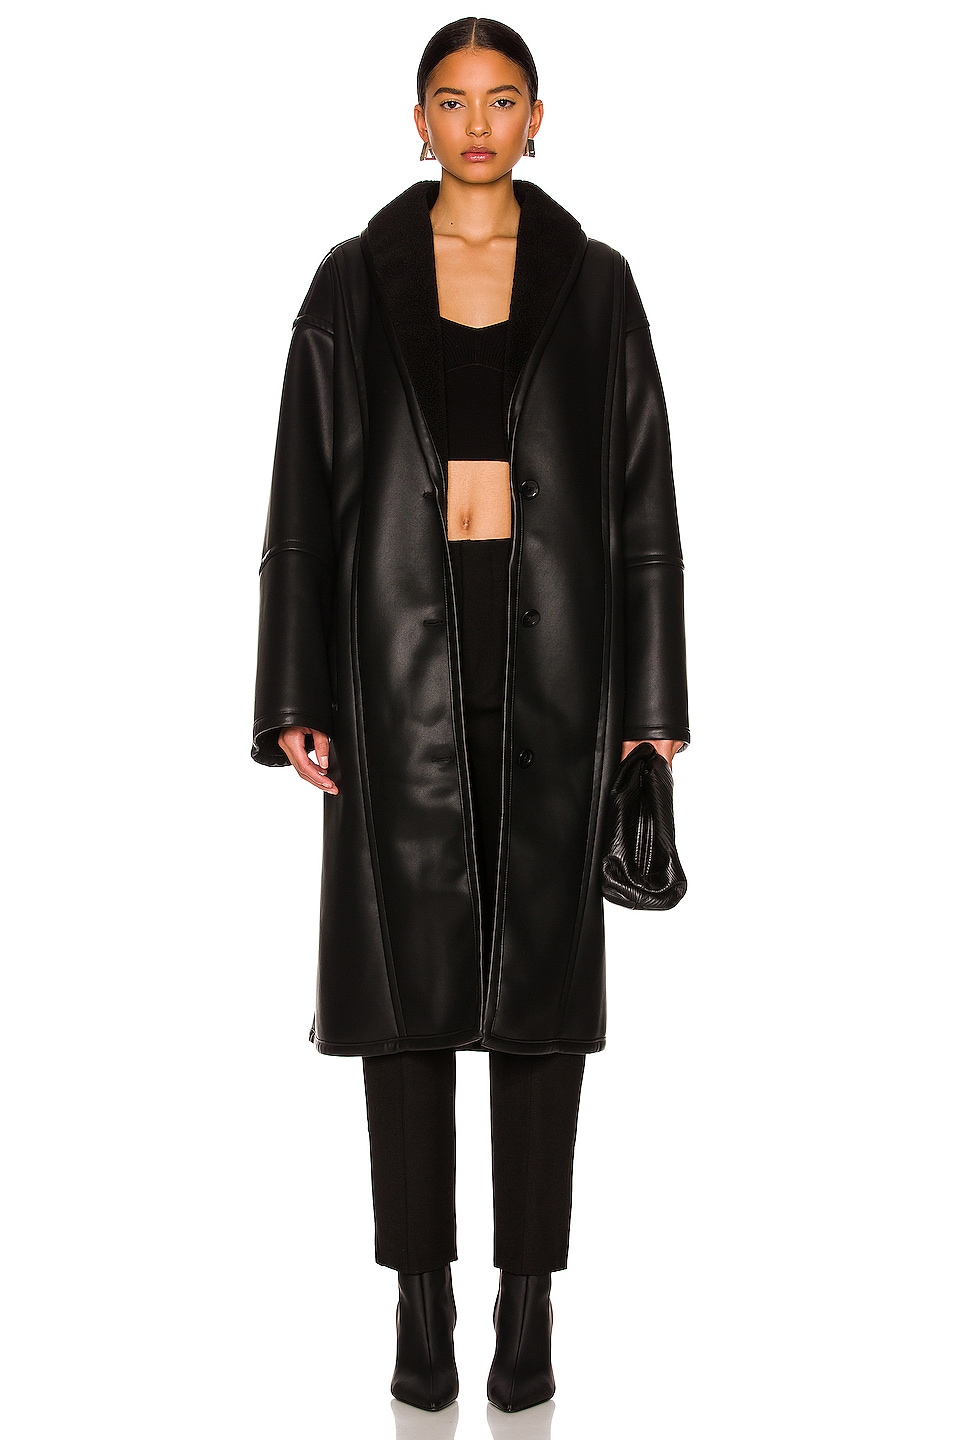 STAND STUDIO Dolores Faux Shearling Coat in Black | FWRD